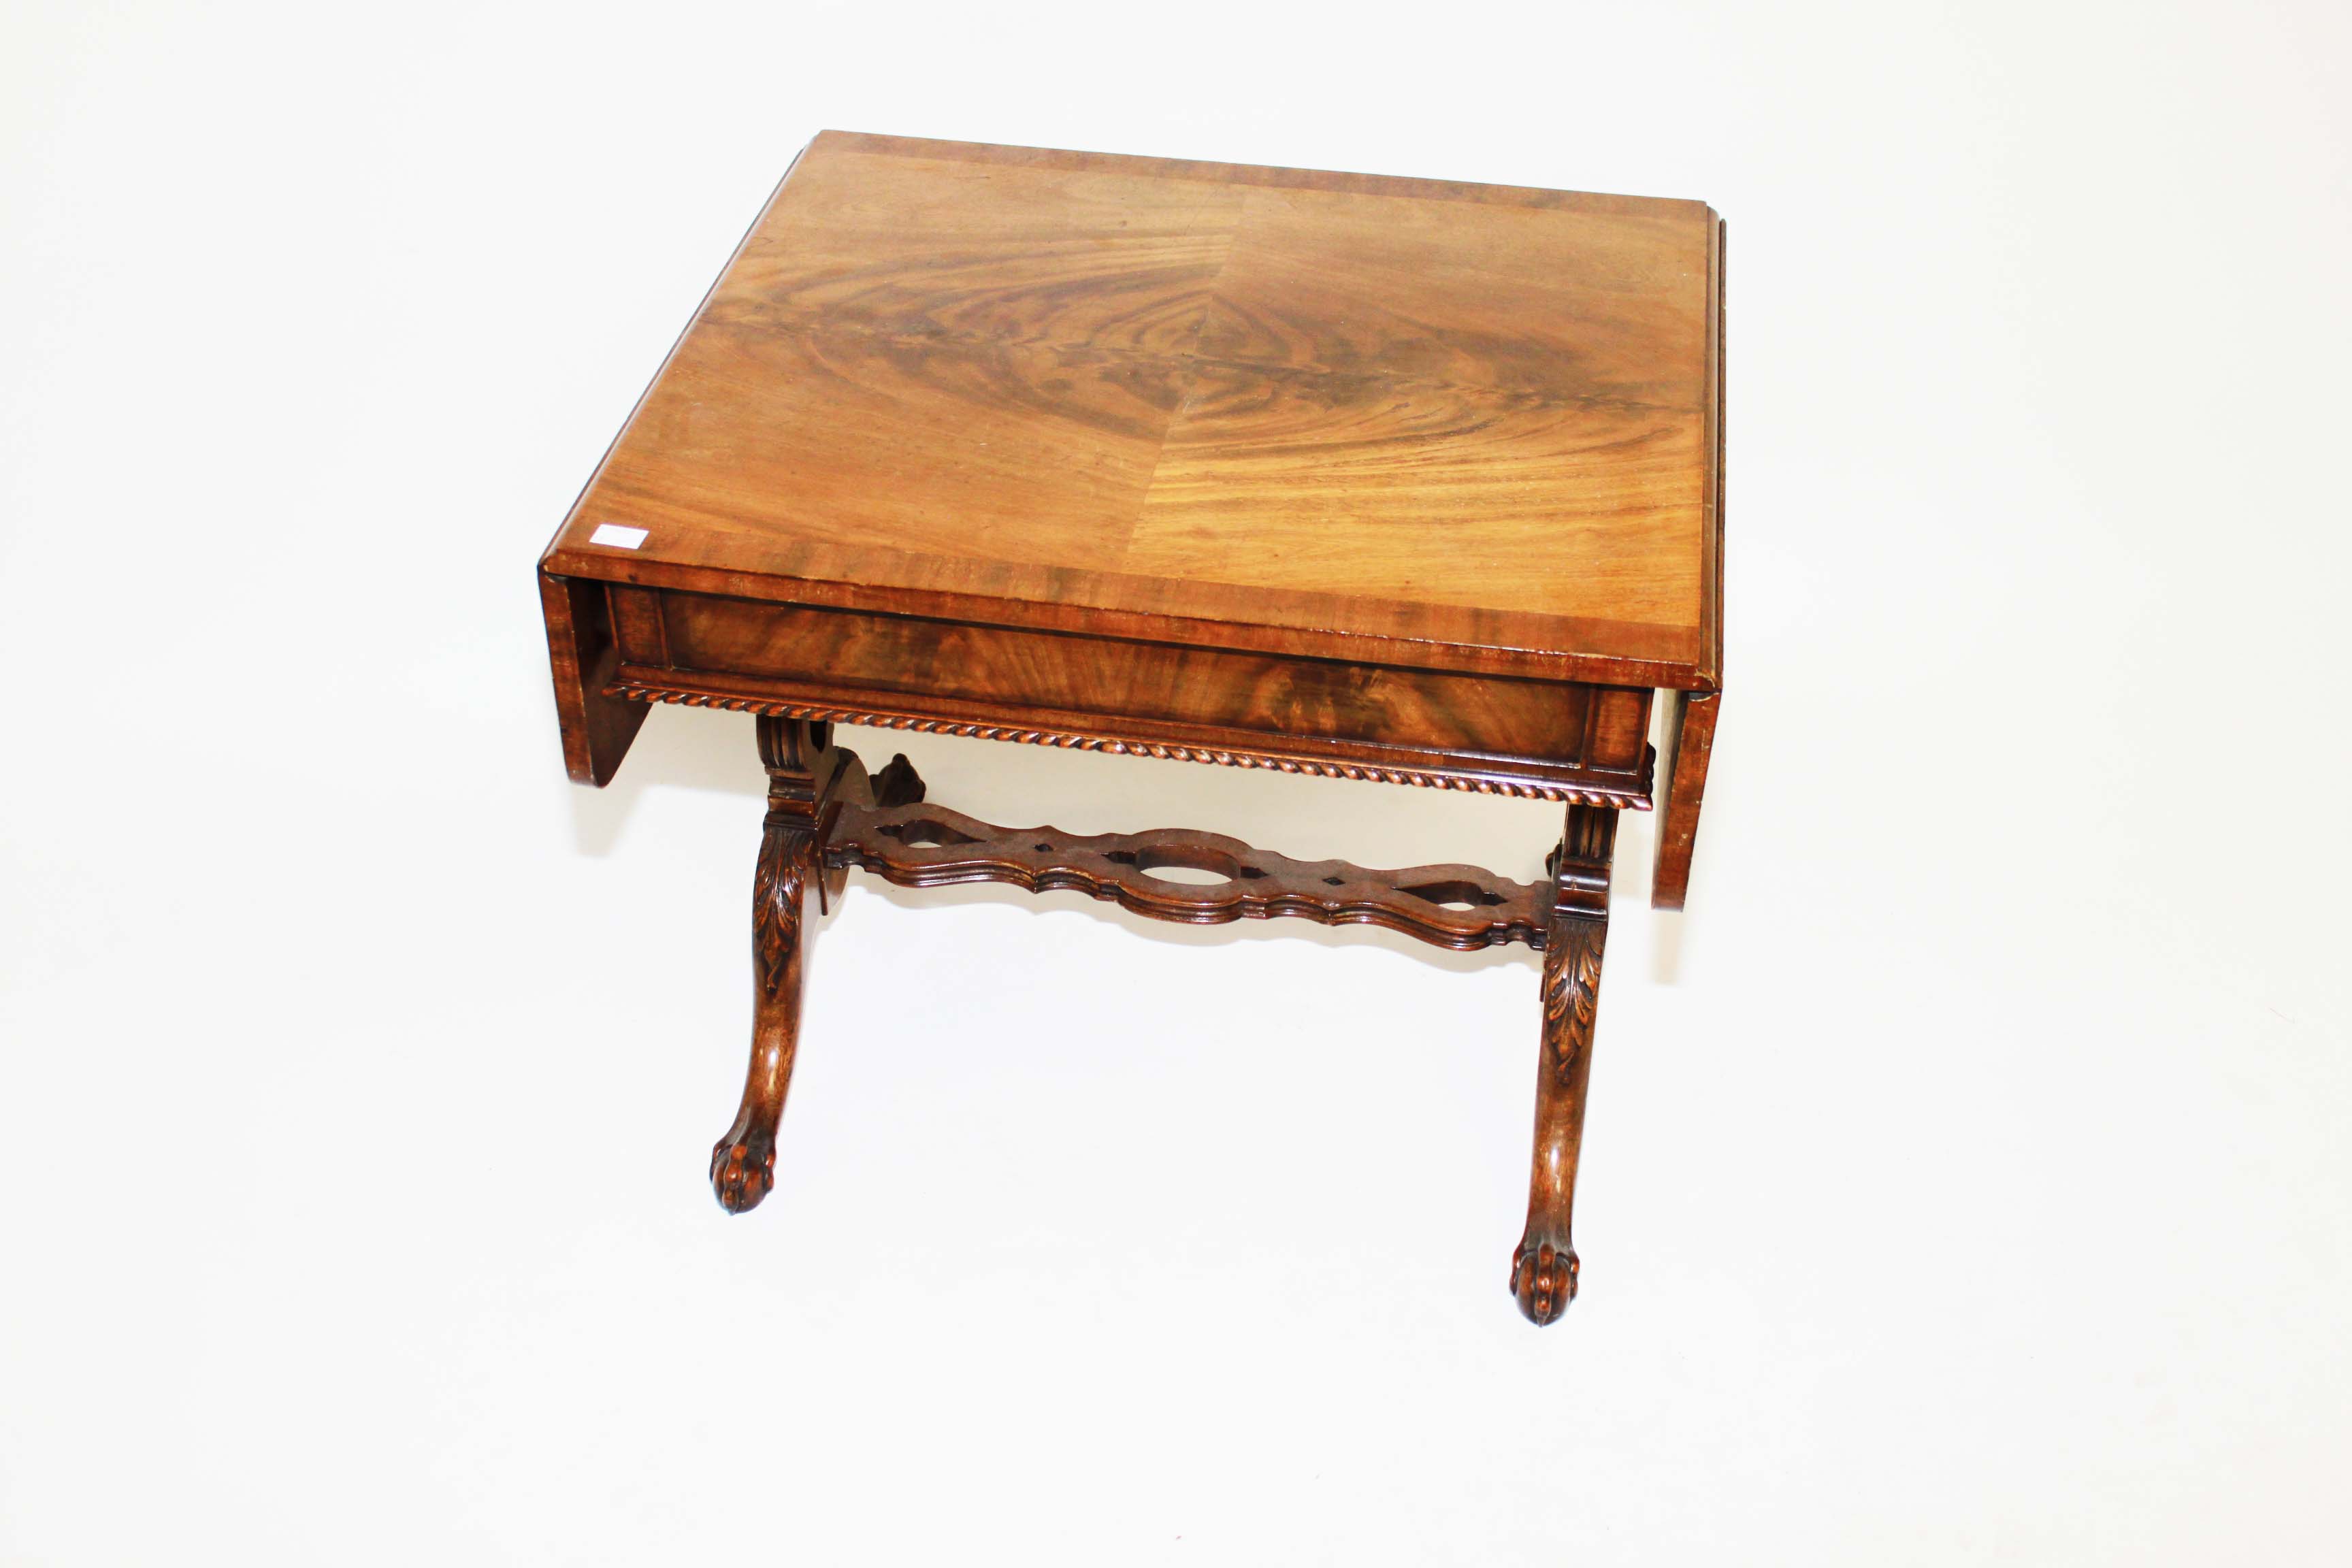 A Cross Banded Mahogany Occasional Table,
in the form of a sofa-table, O.R.M., with two D shaped